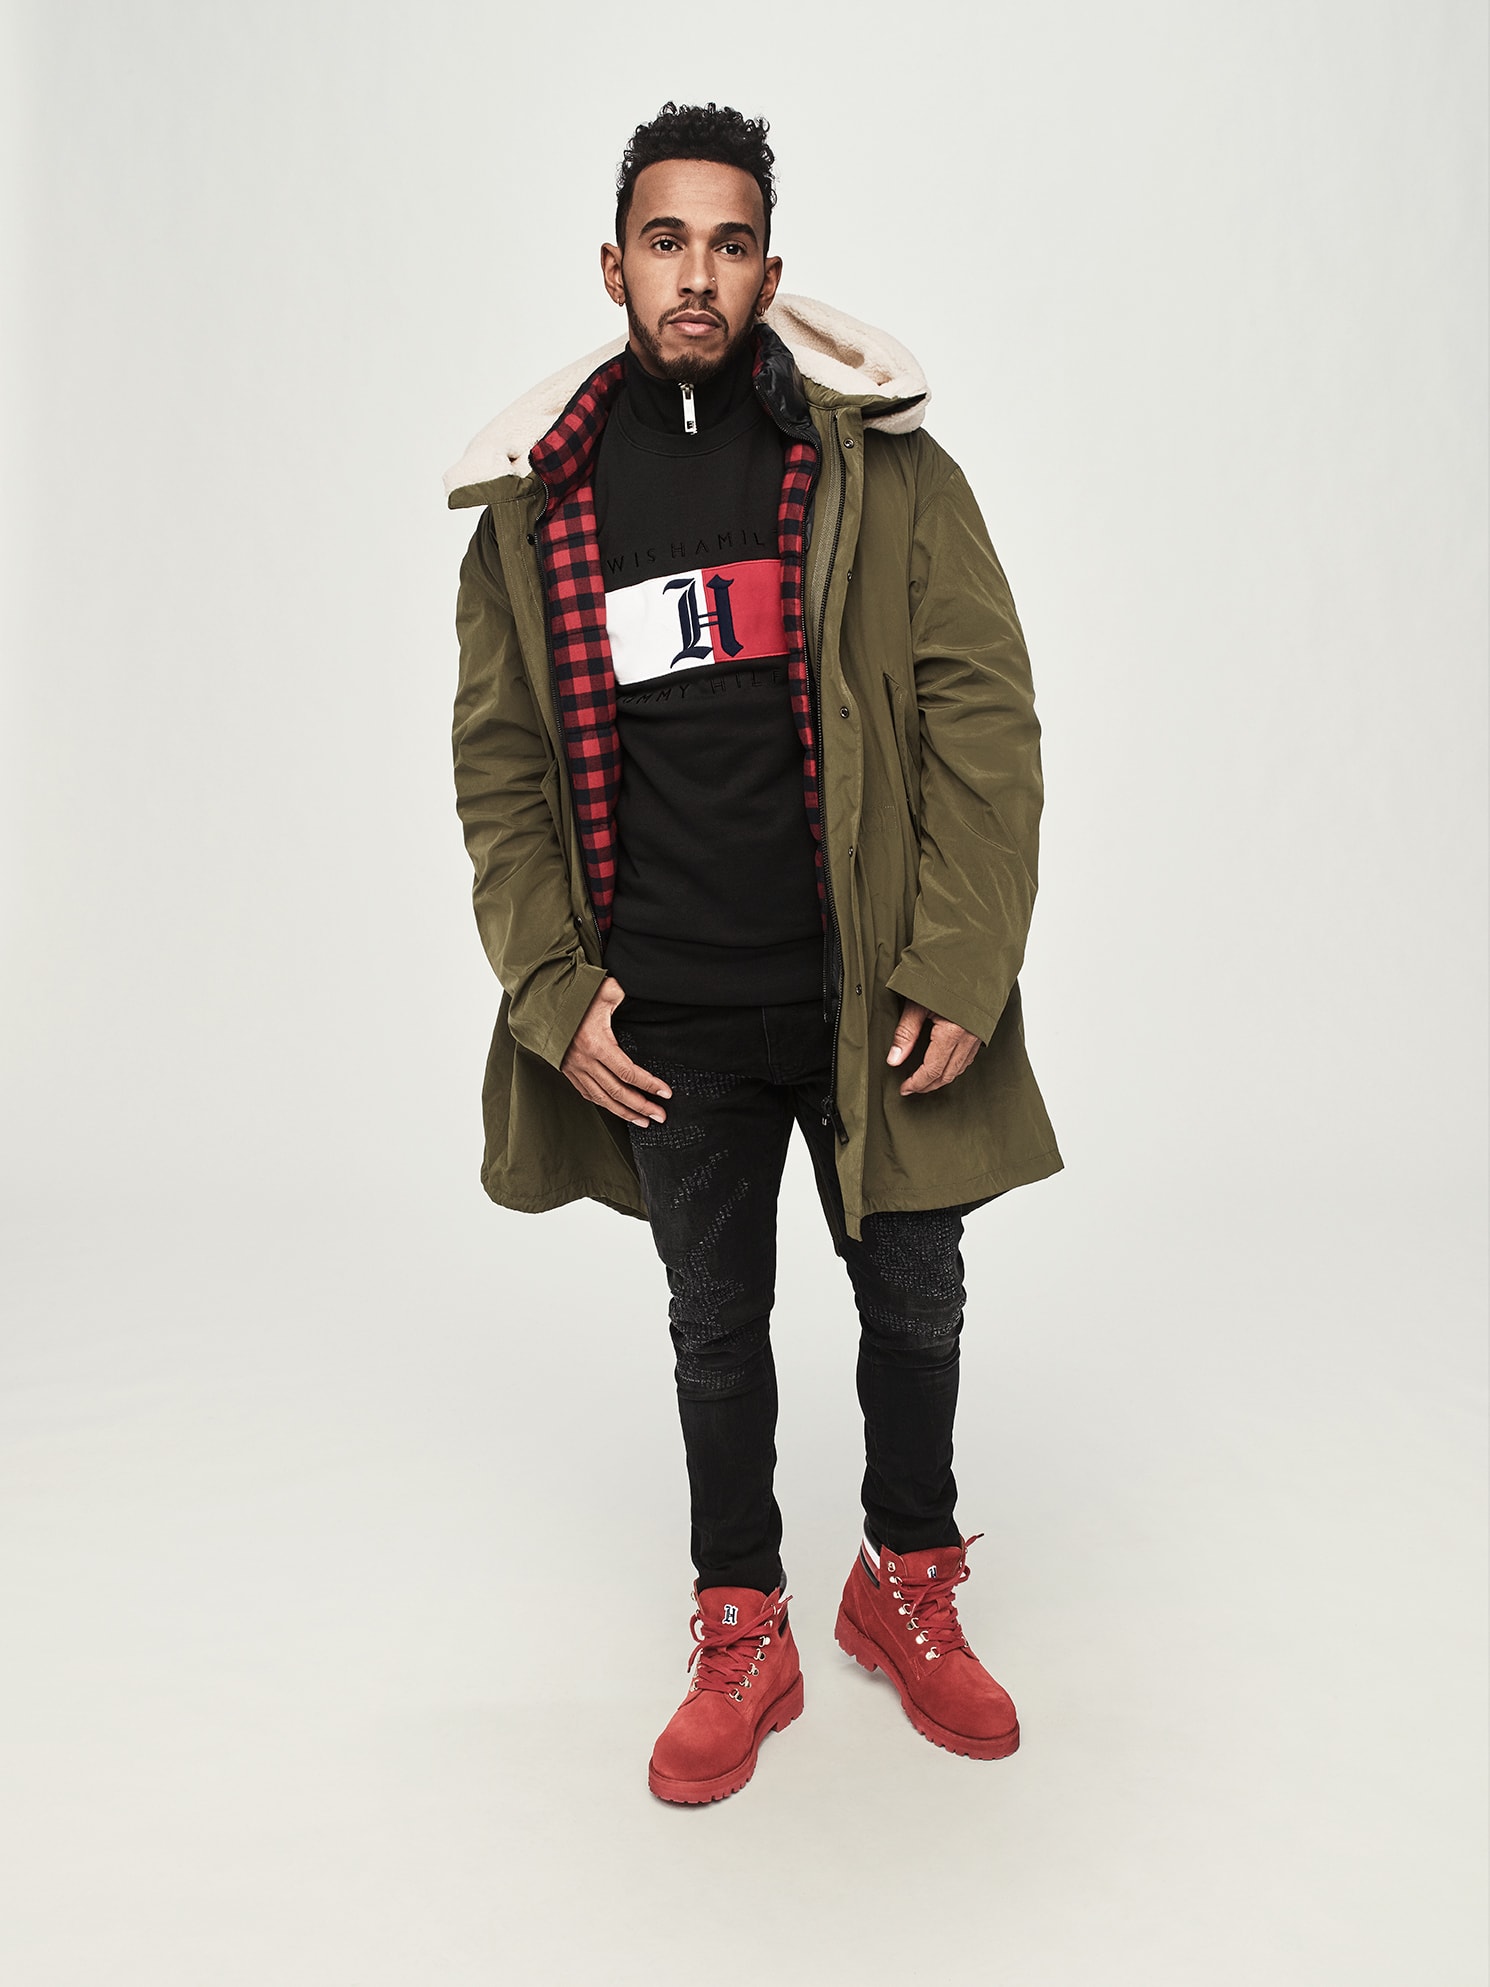 FALL 2018 TOMMYXLEWIS COLLECTION